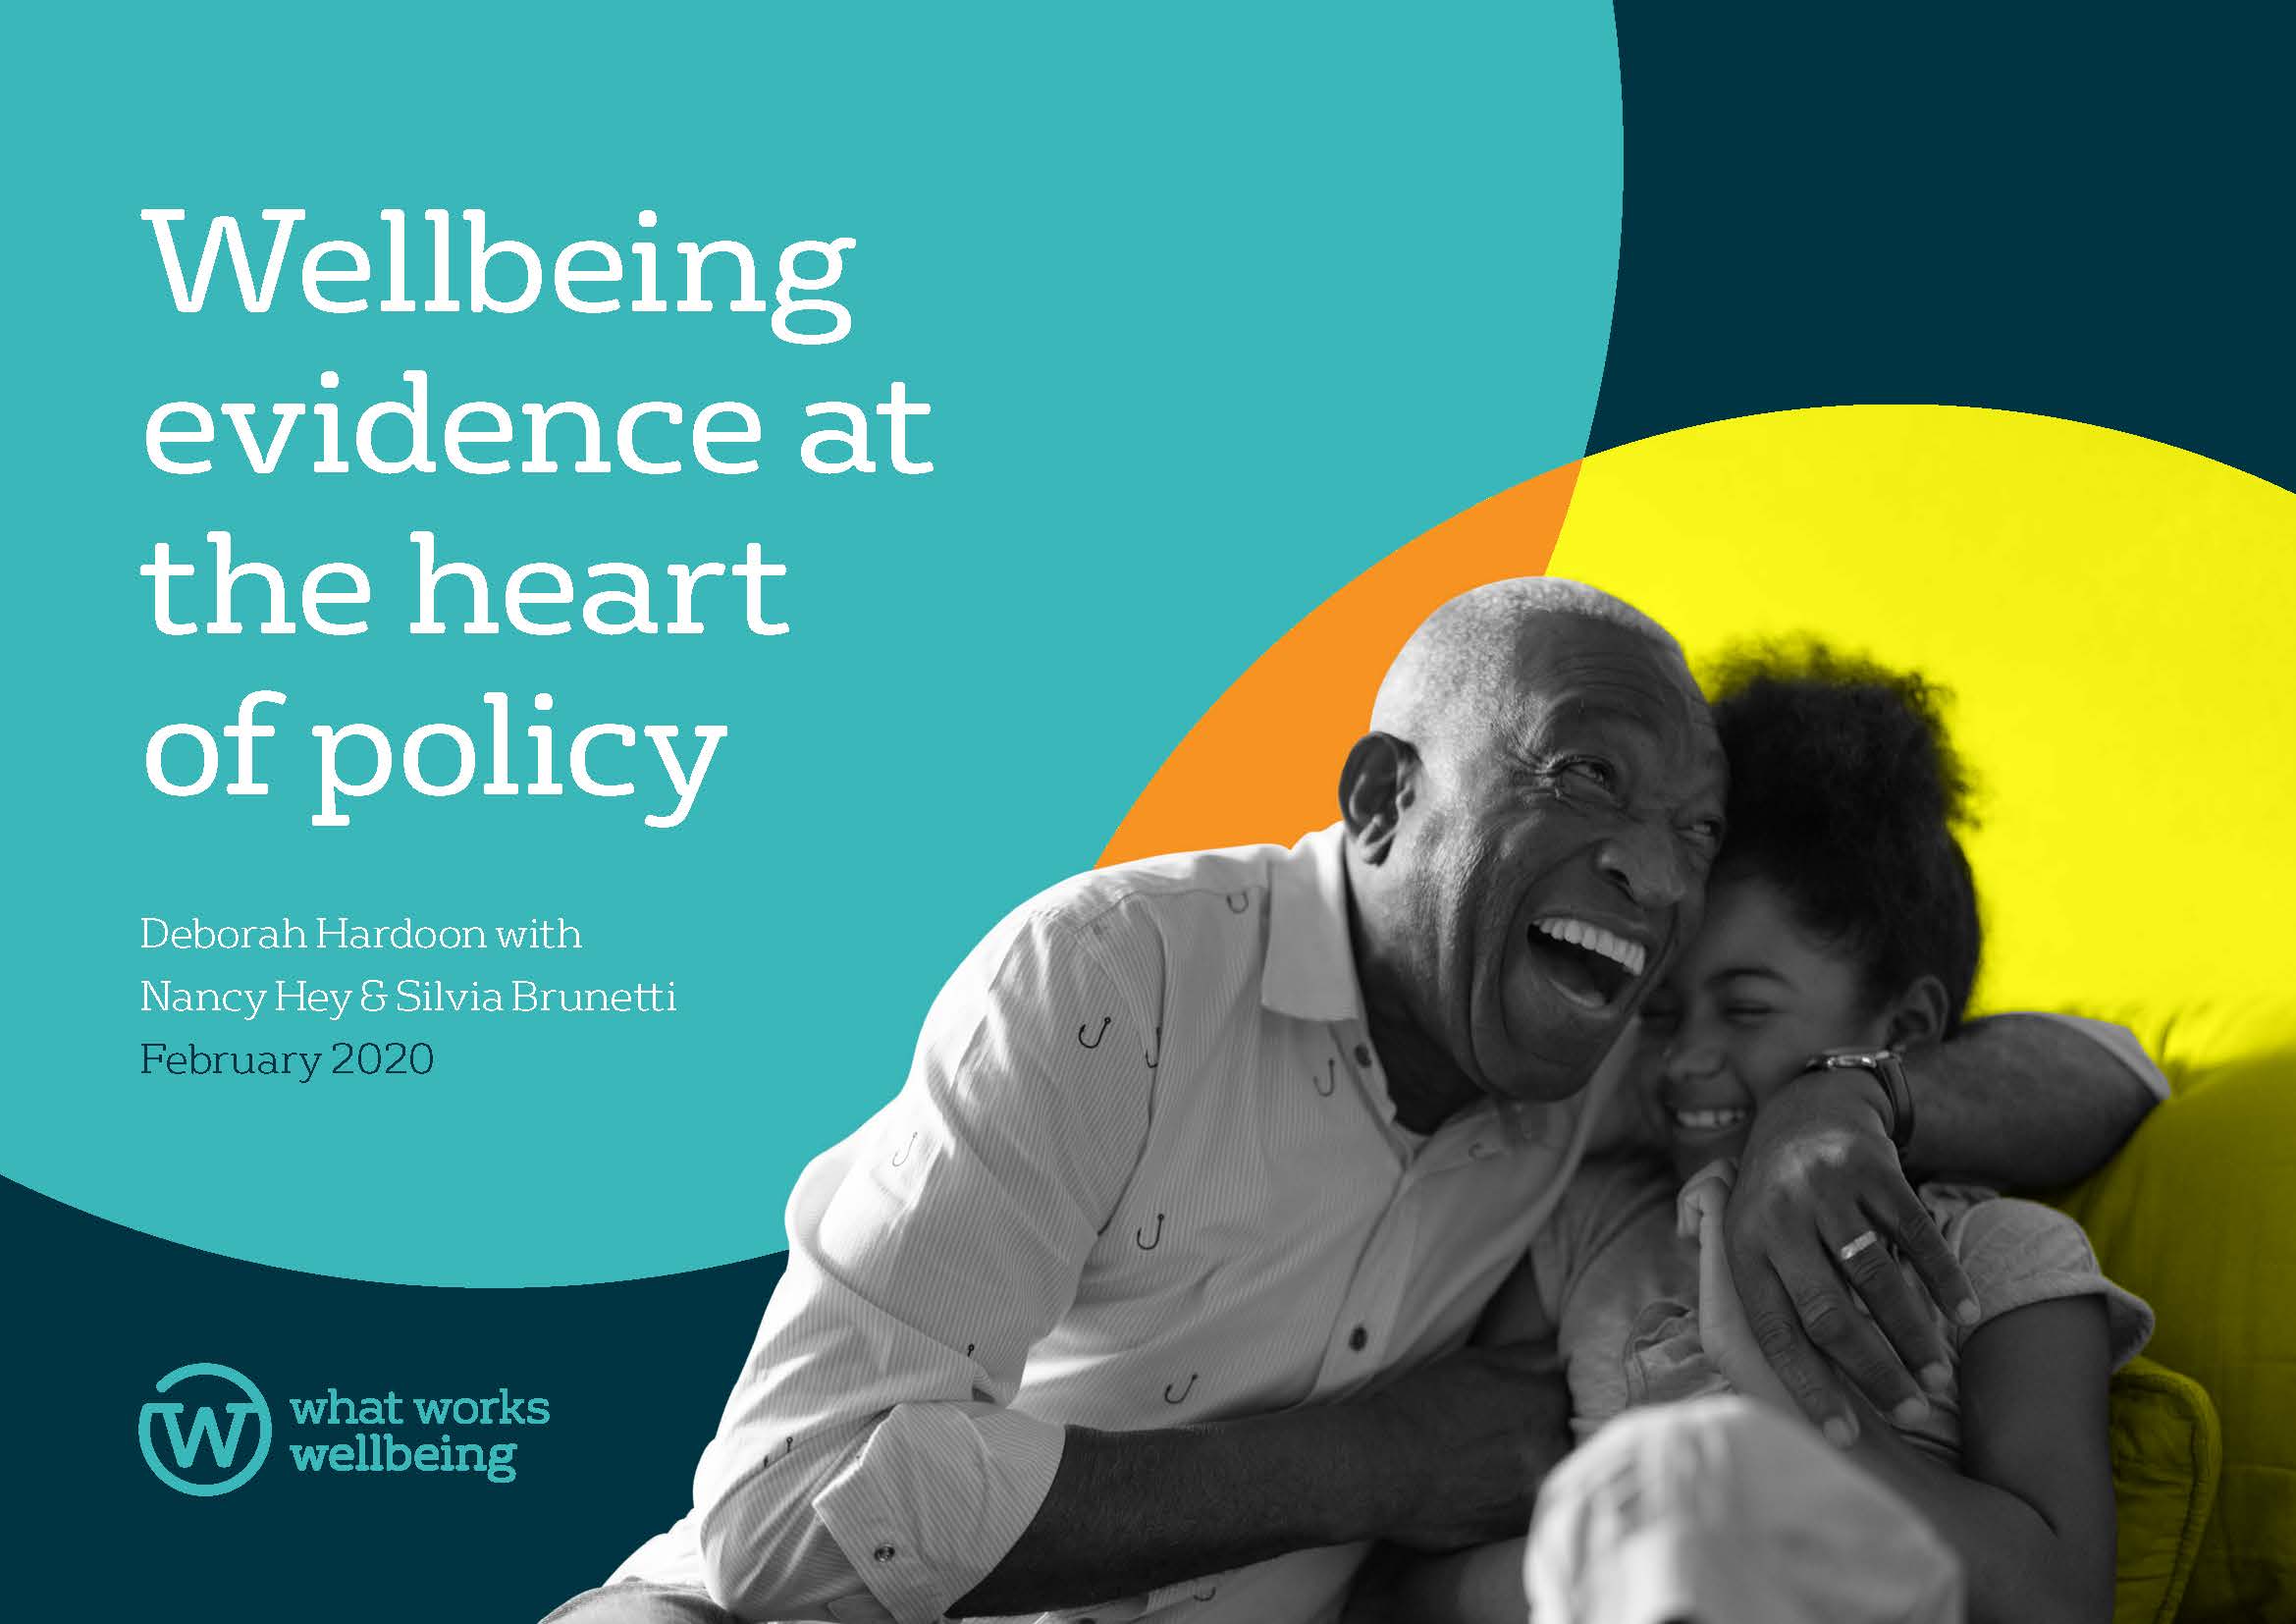 Wellbeing evidence at the heart of policy